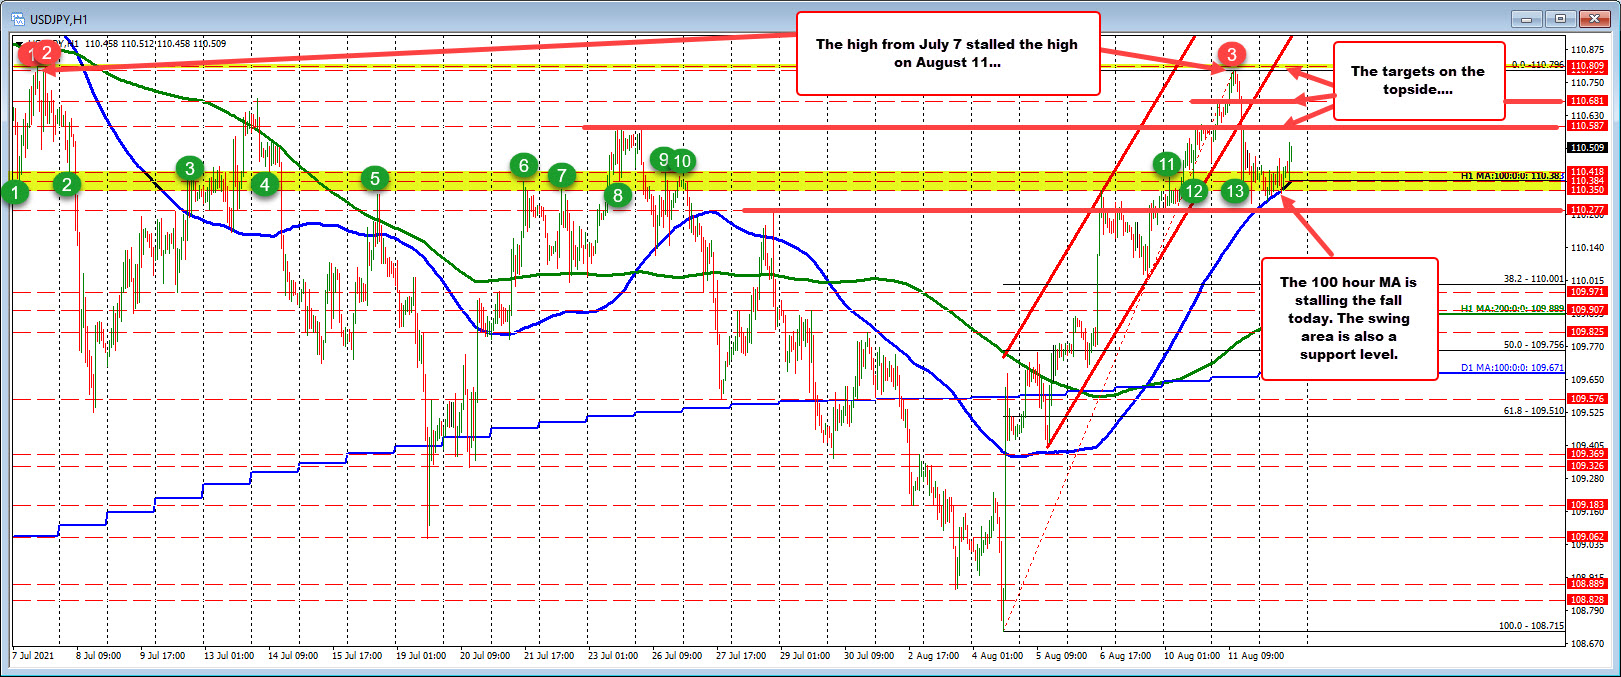 The  100 hour MA and swing area stalls the fall